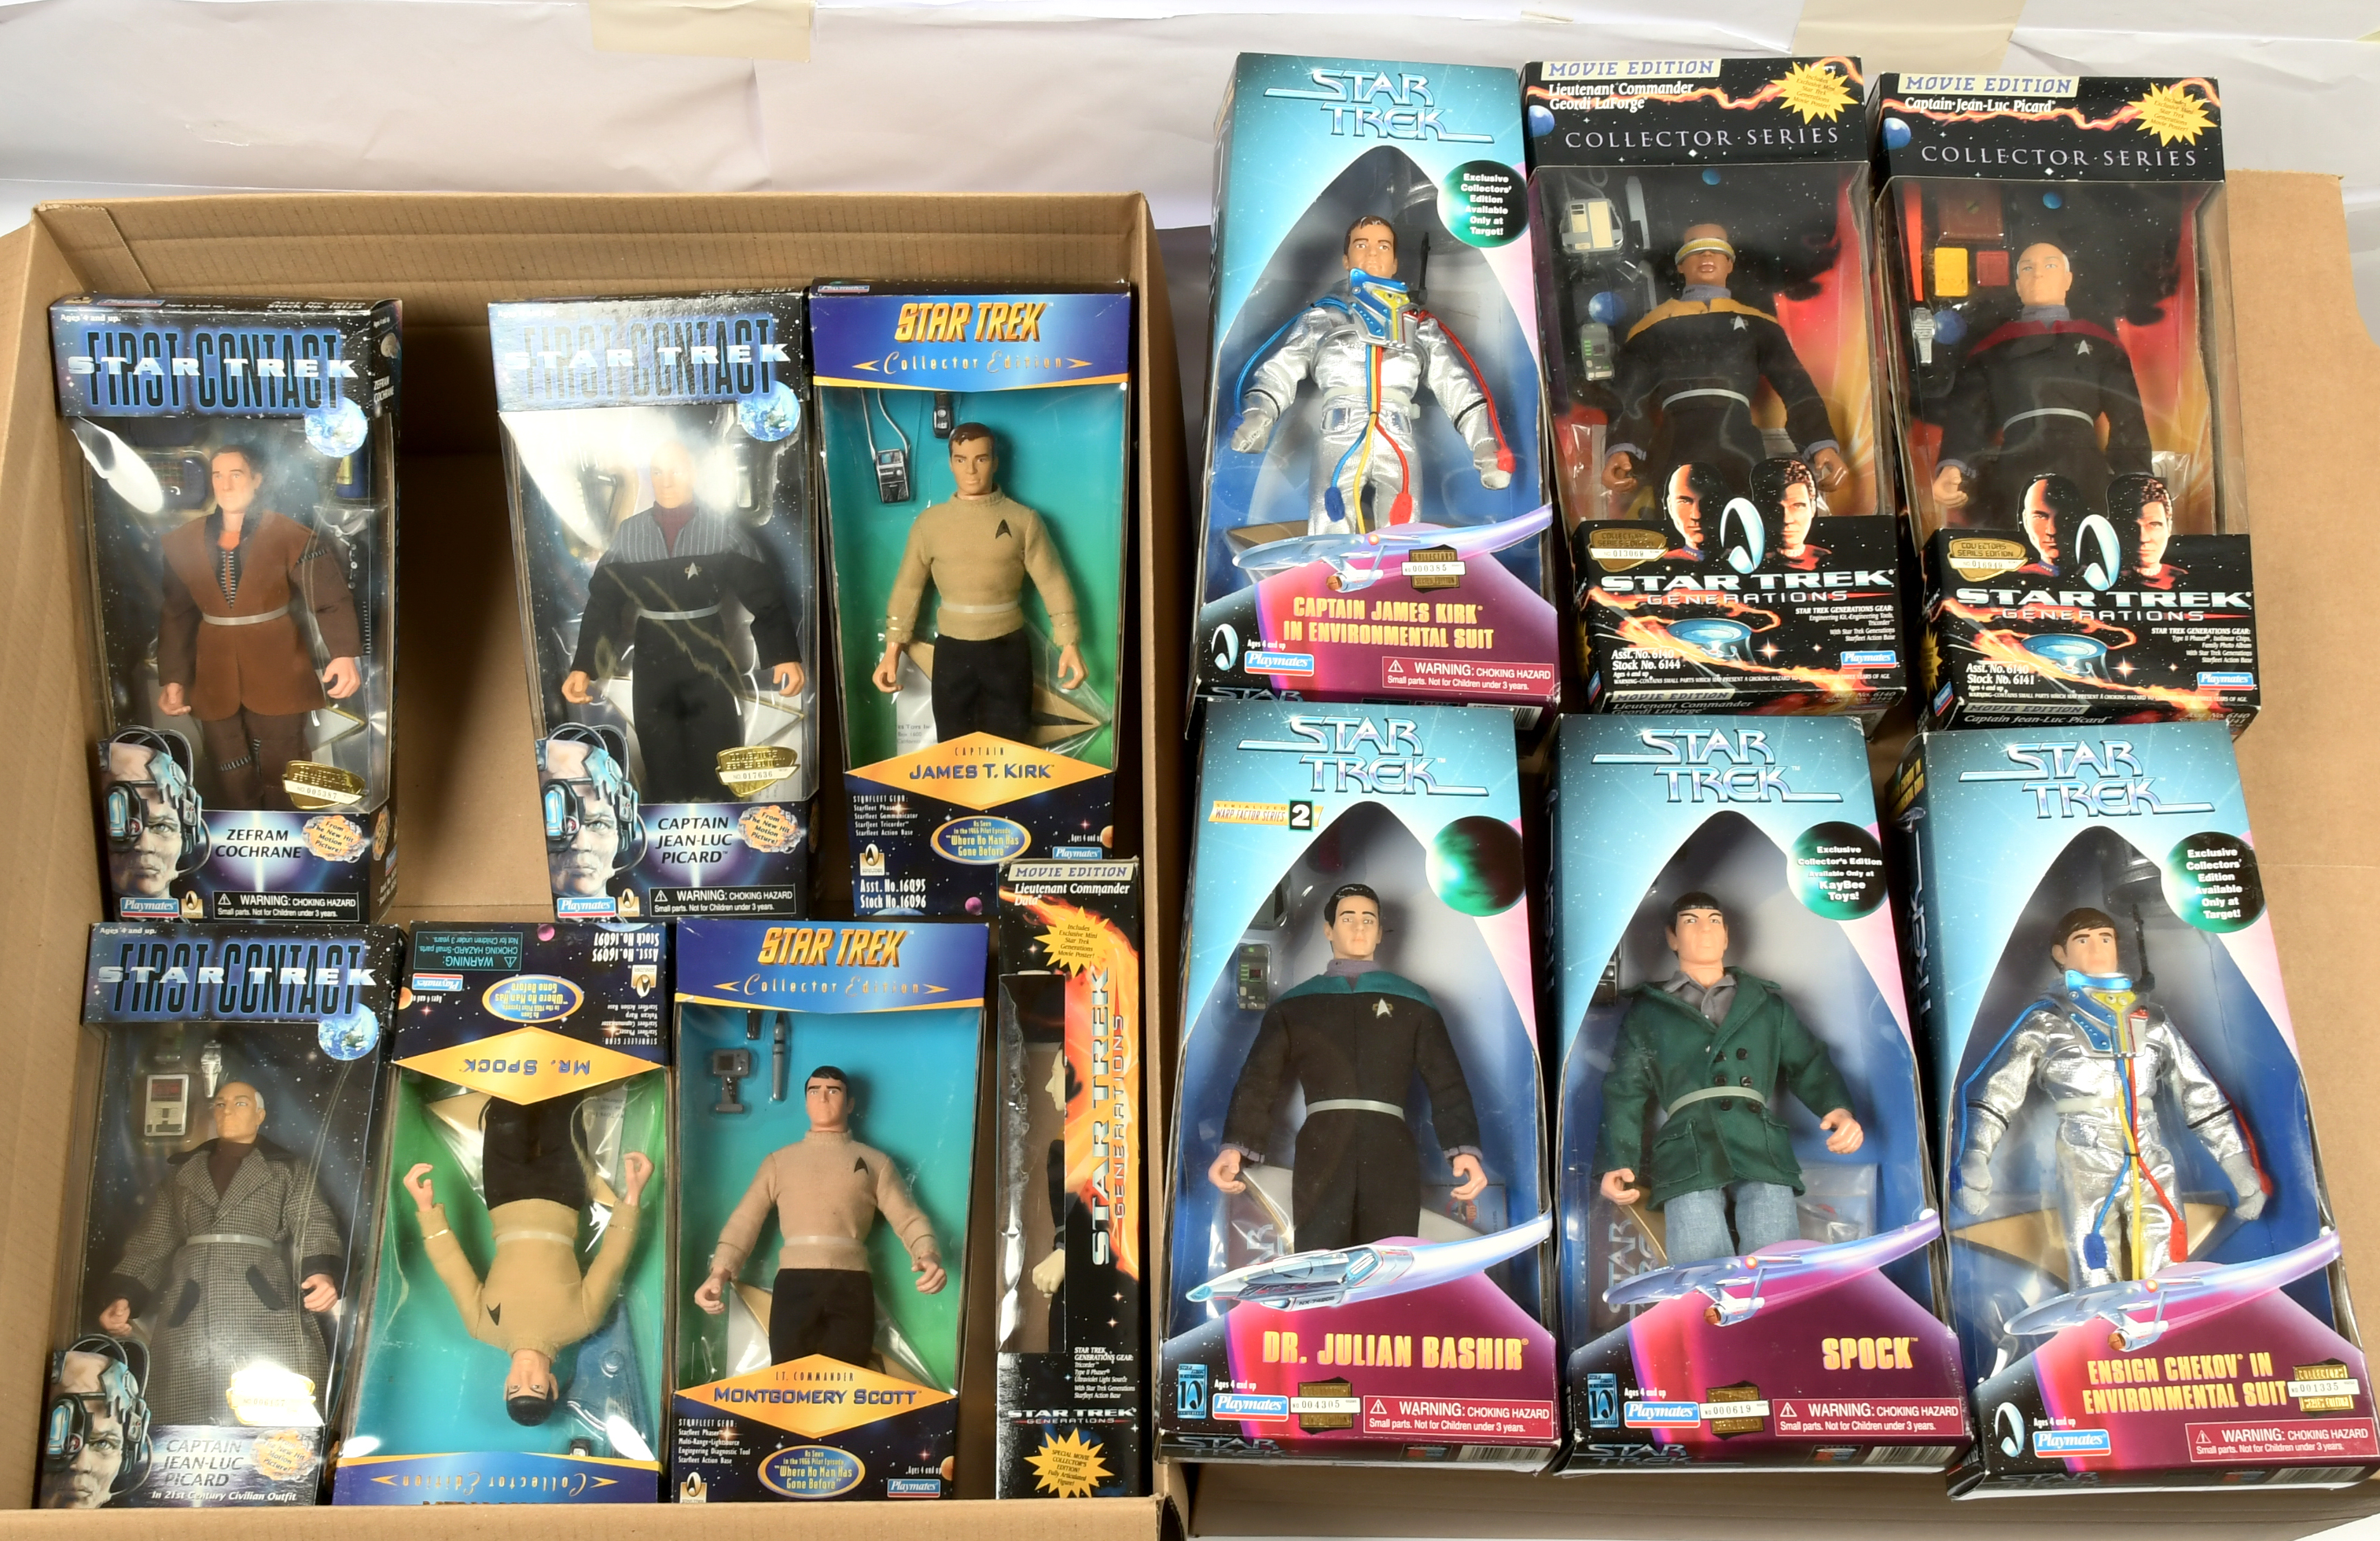 Playmates Star Trek collection of 9" action figures